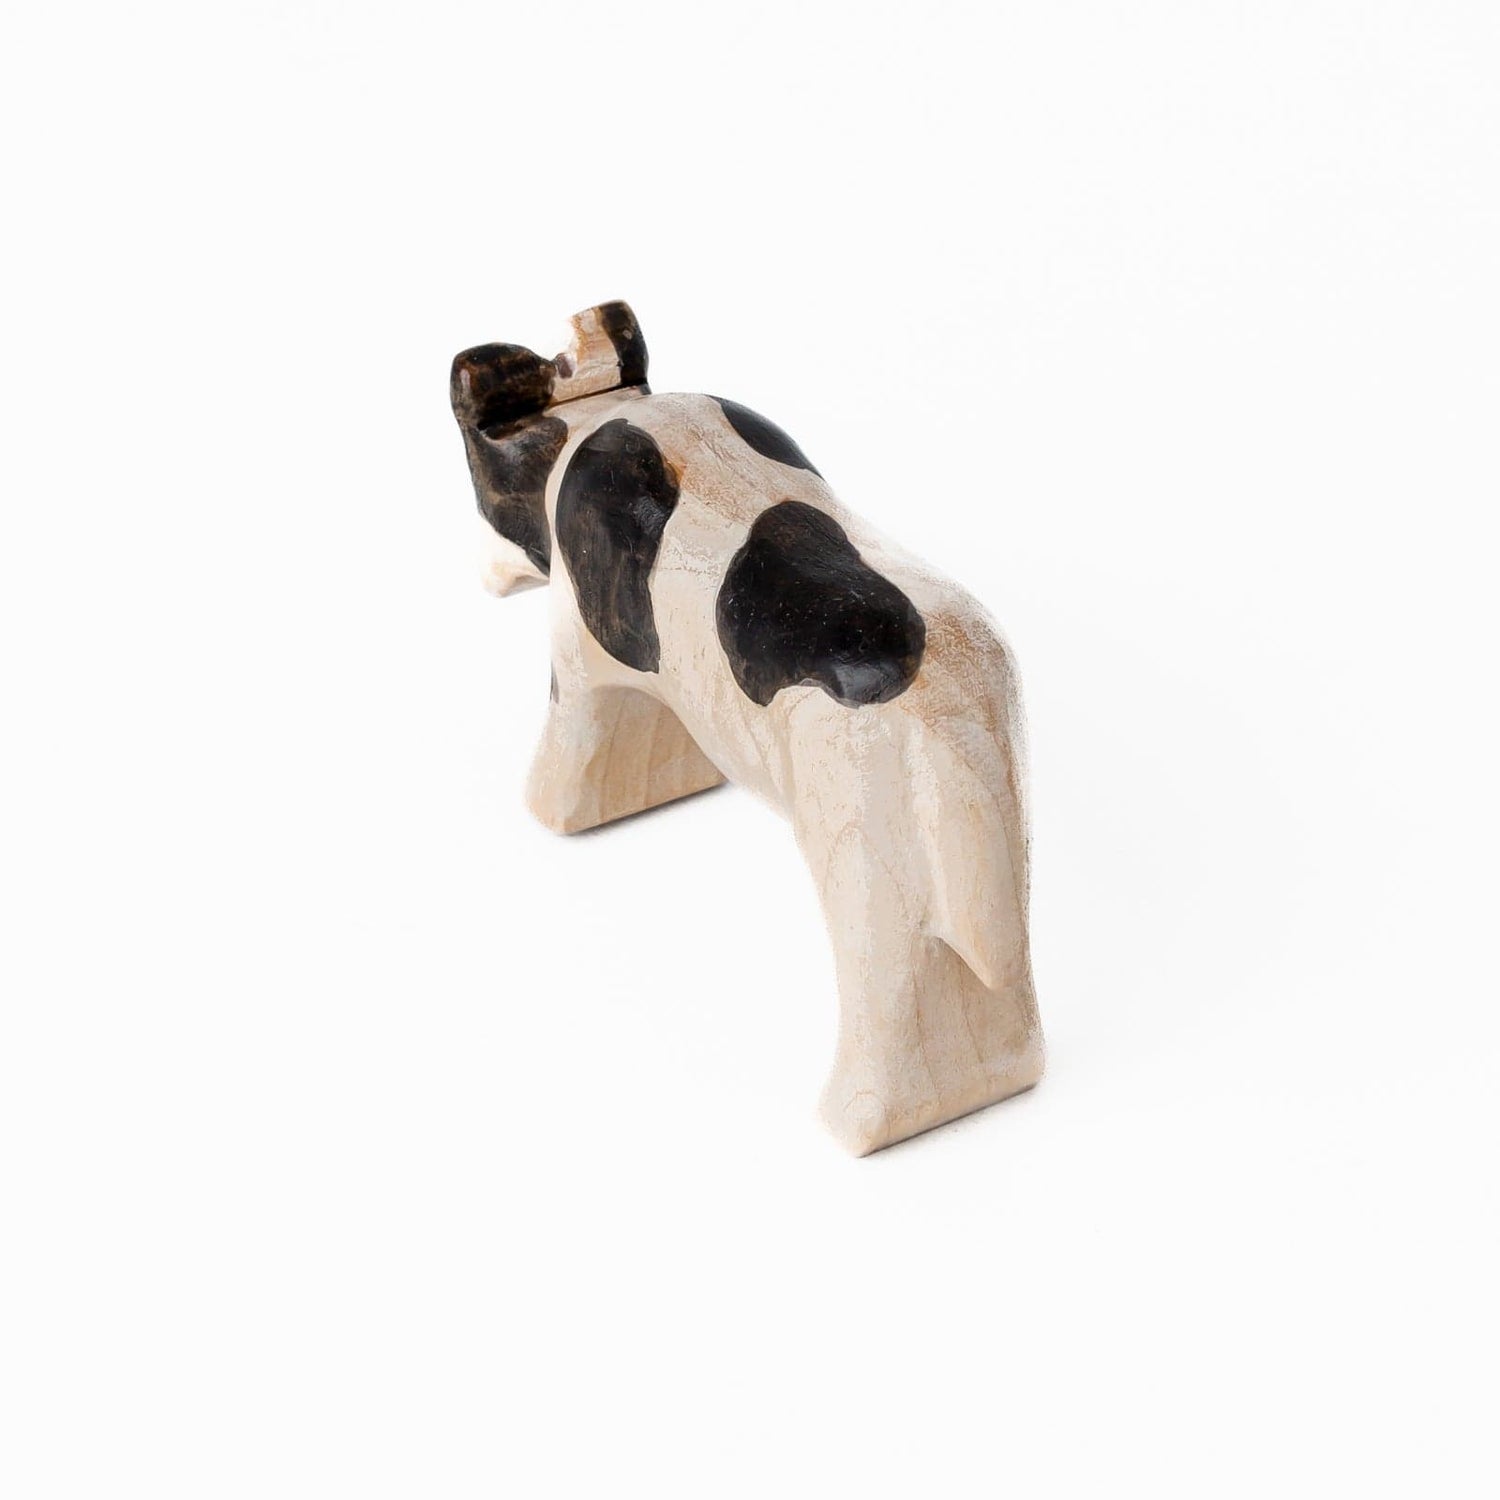 Bumbleberry Toys Wooden Animals "Clive Calf" Wooden Animal Toy (Handmade in Canada)